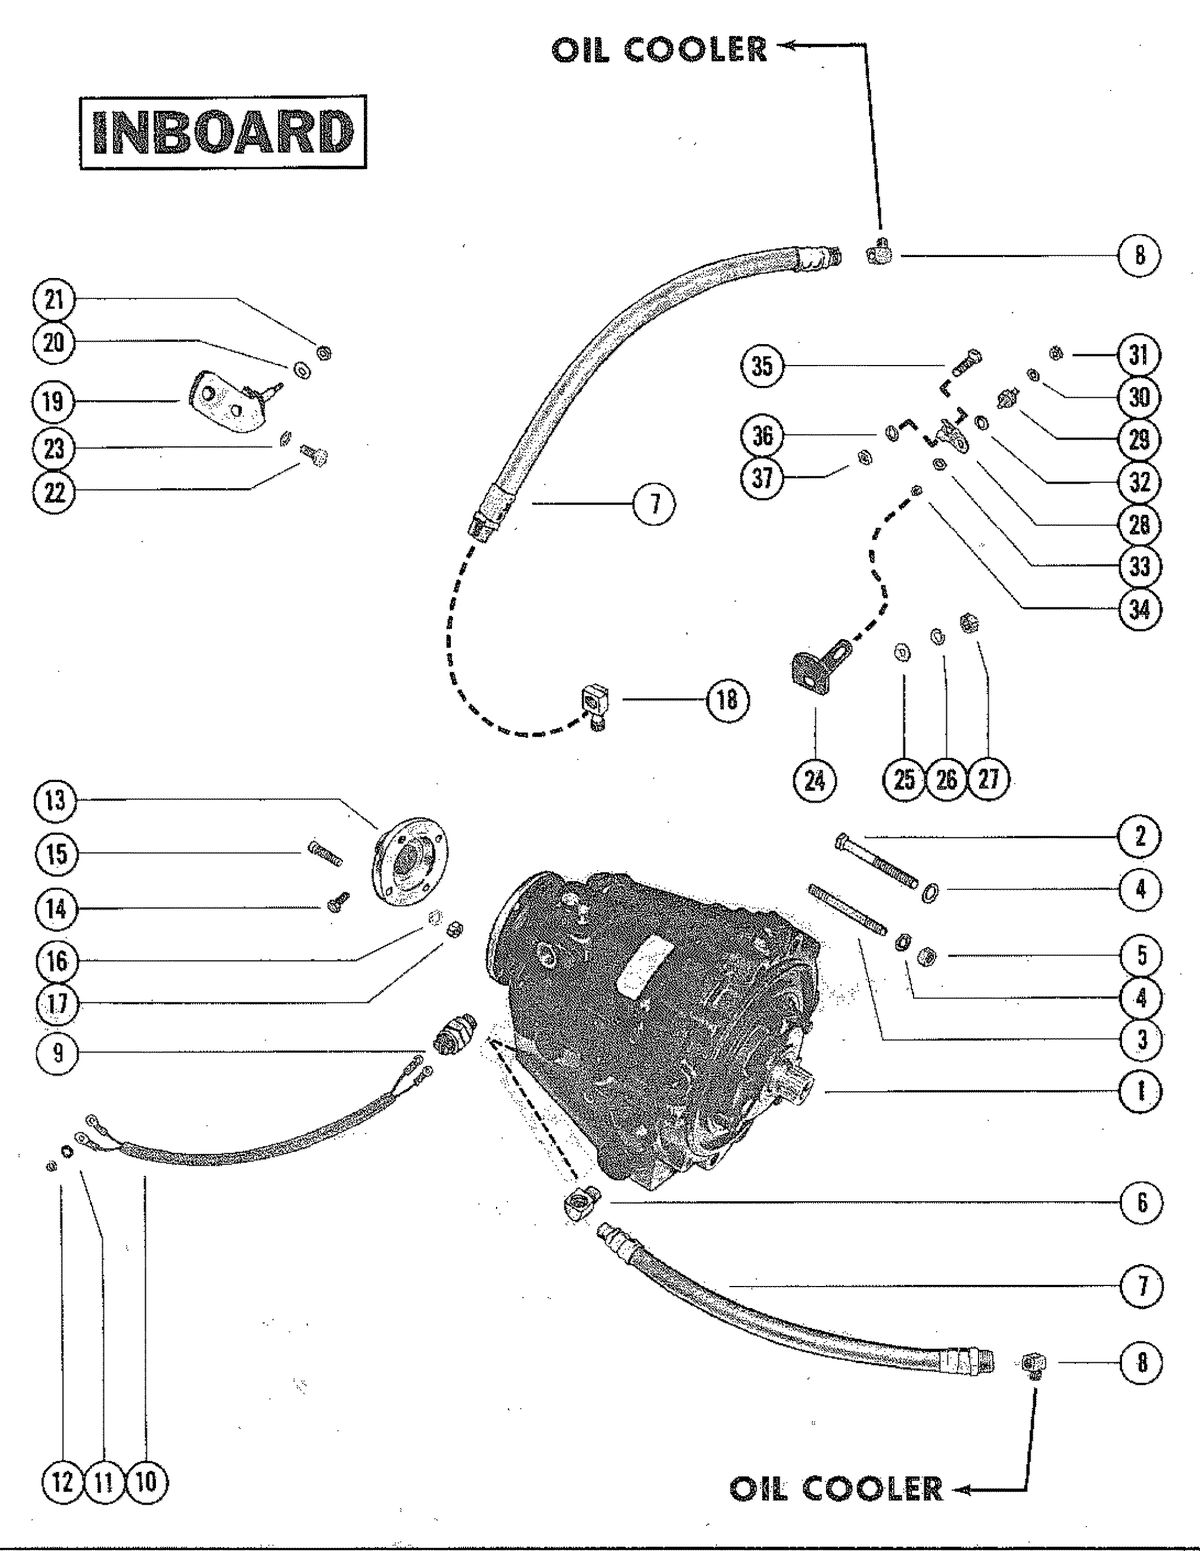 MERCRUISER 255 ENGINE TRANSMISSION AND RELATED PARTS (INBOARD)